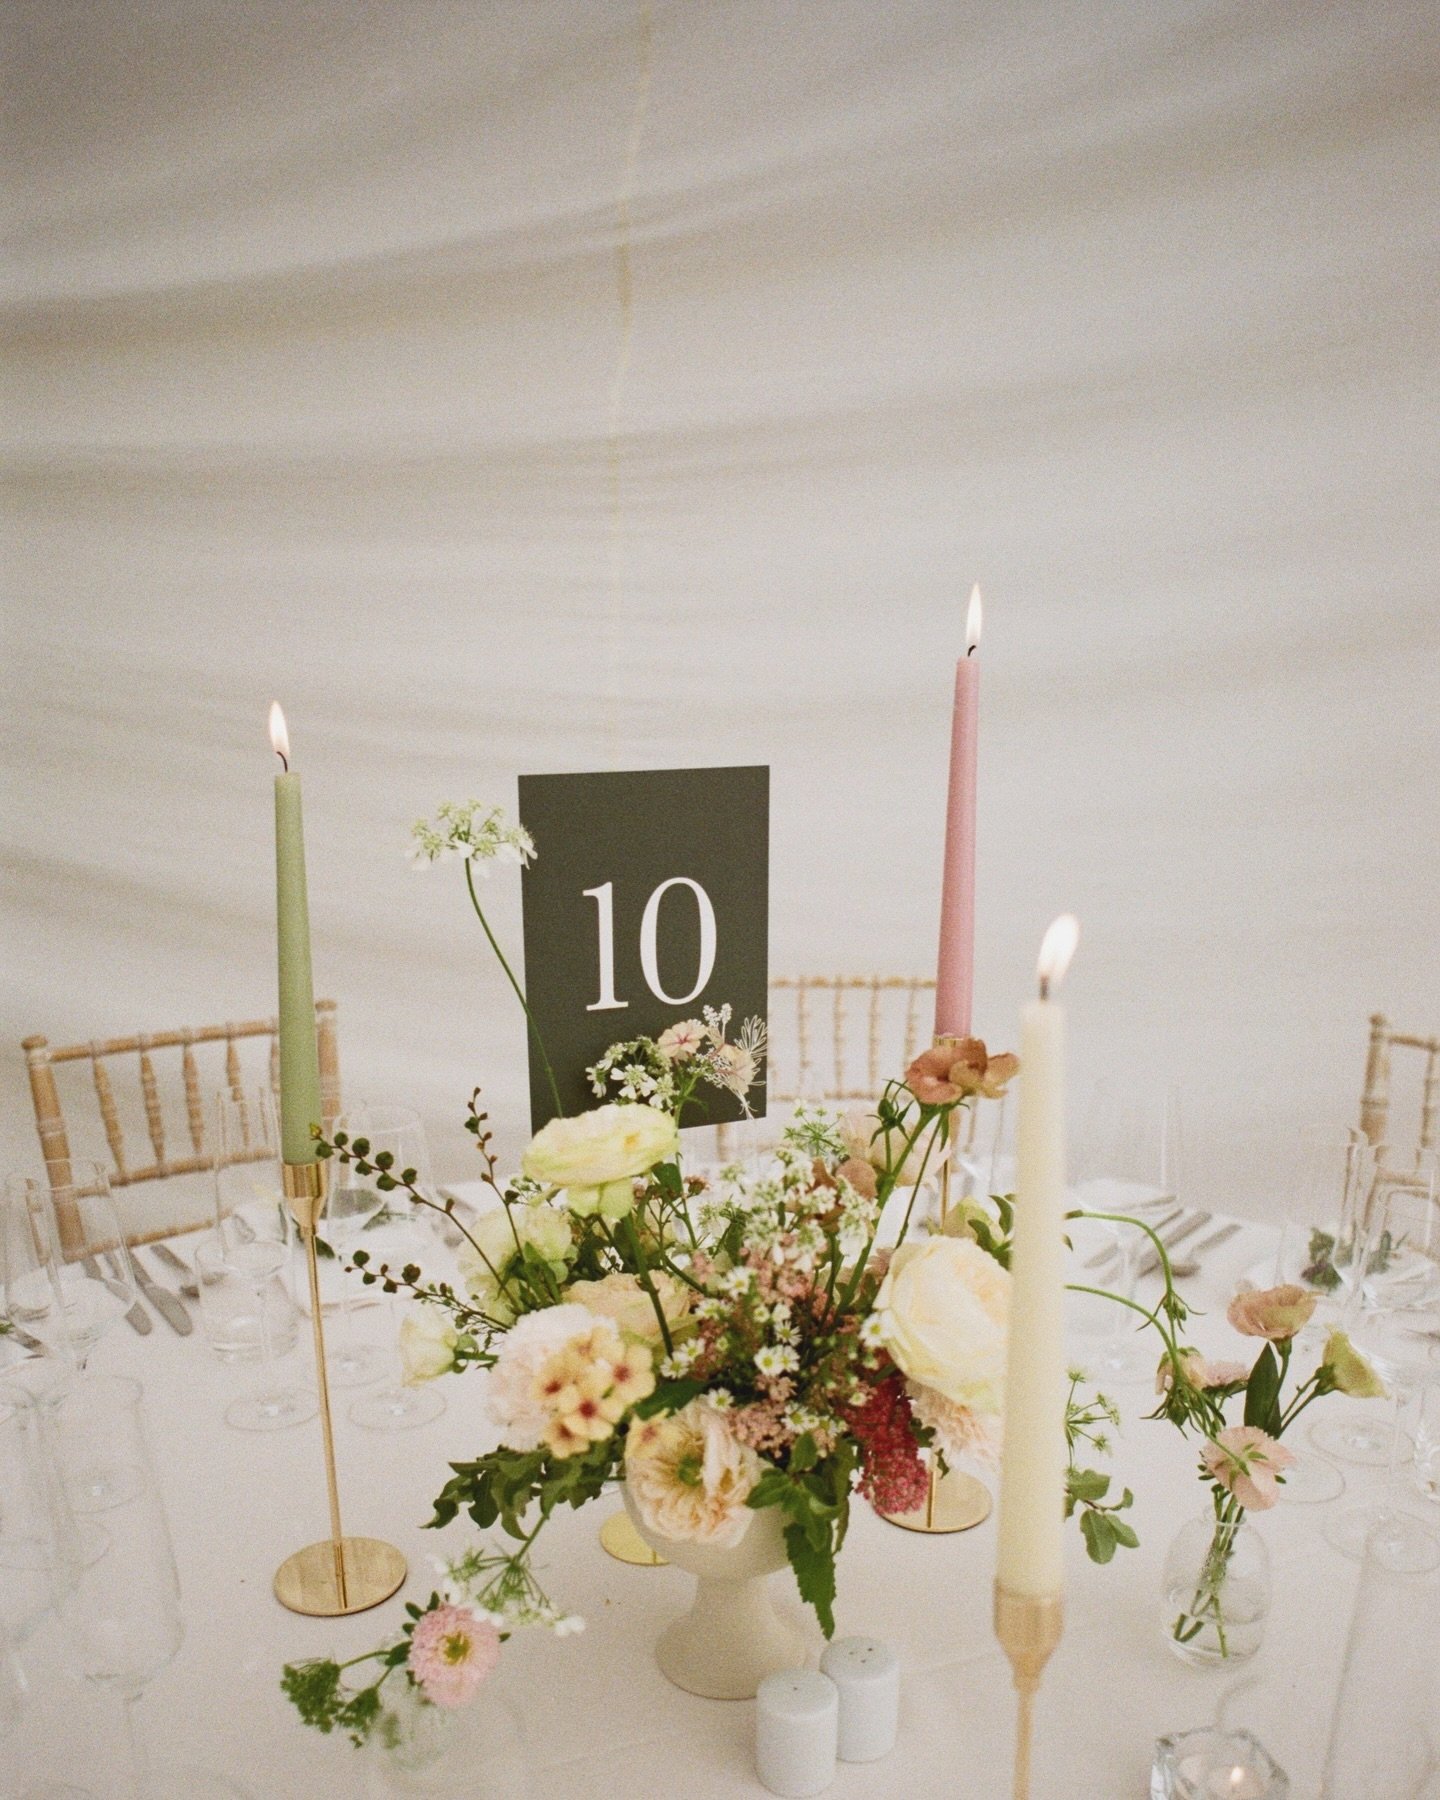 Spring tablescape on film with soft pastel hues and feminine florals.

Venue @camehousedorset 
Flowers by @daisygraceblooms 
Wedding planning and coordination @bellissimoweddings

Came House | Dorset Wedding Photographer | Weddings on film | Wedding 